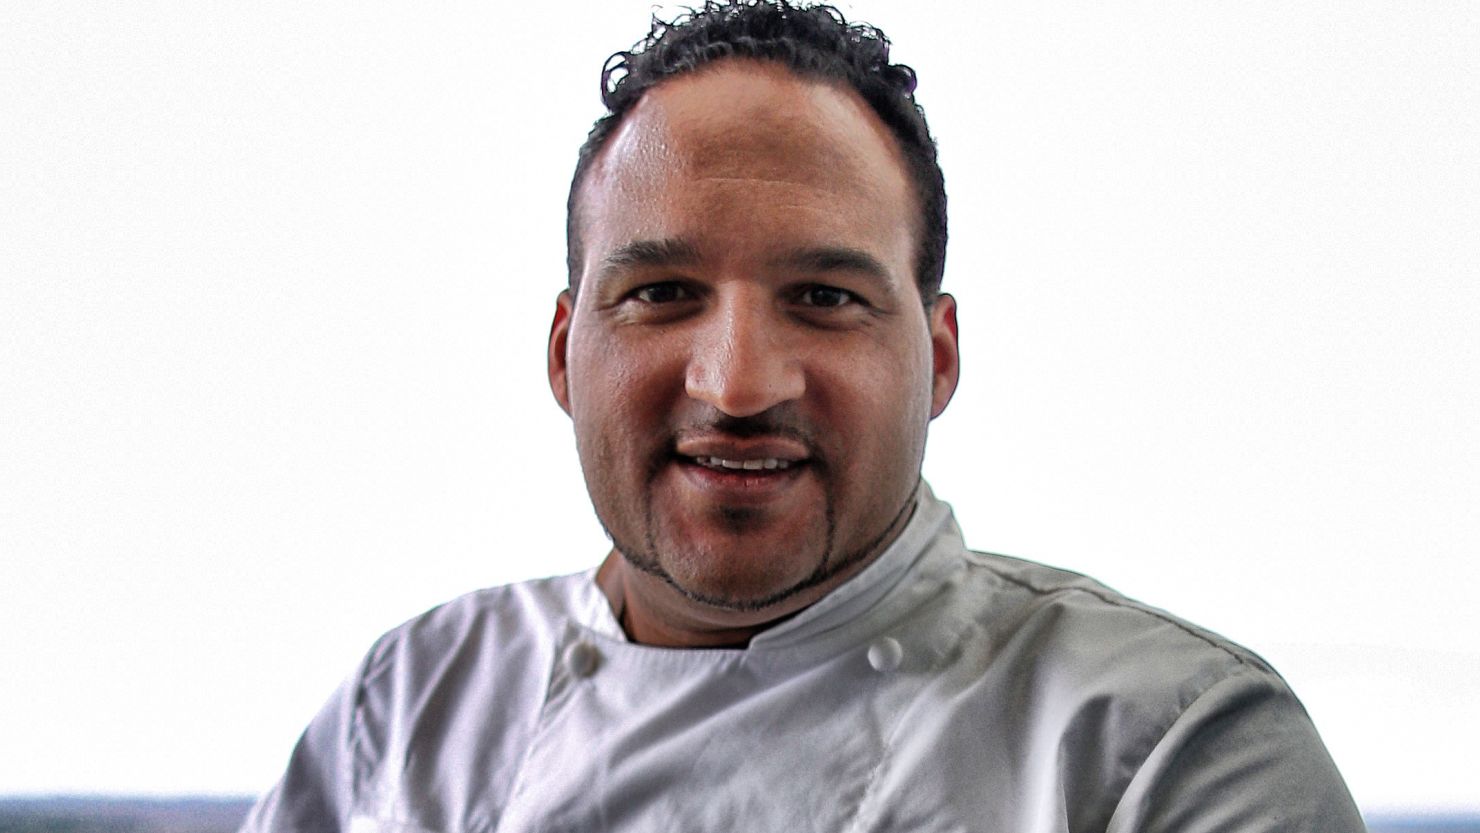 "They say an army marches on its stomach and Williams is no exception" - Michael Caines